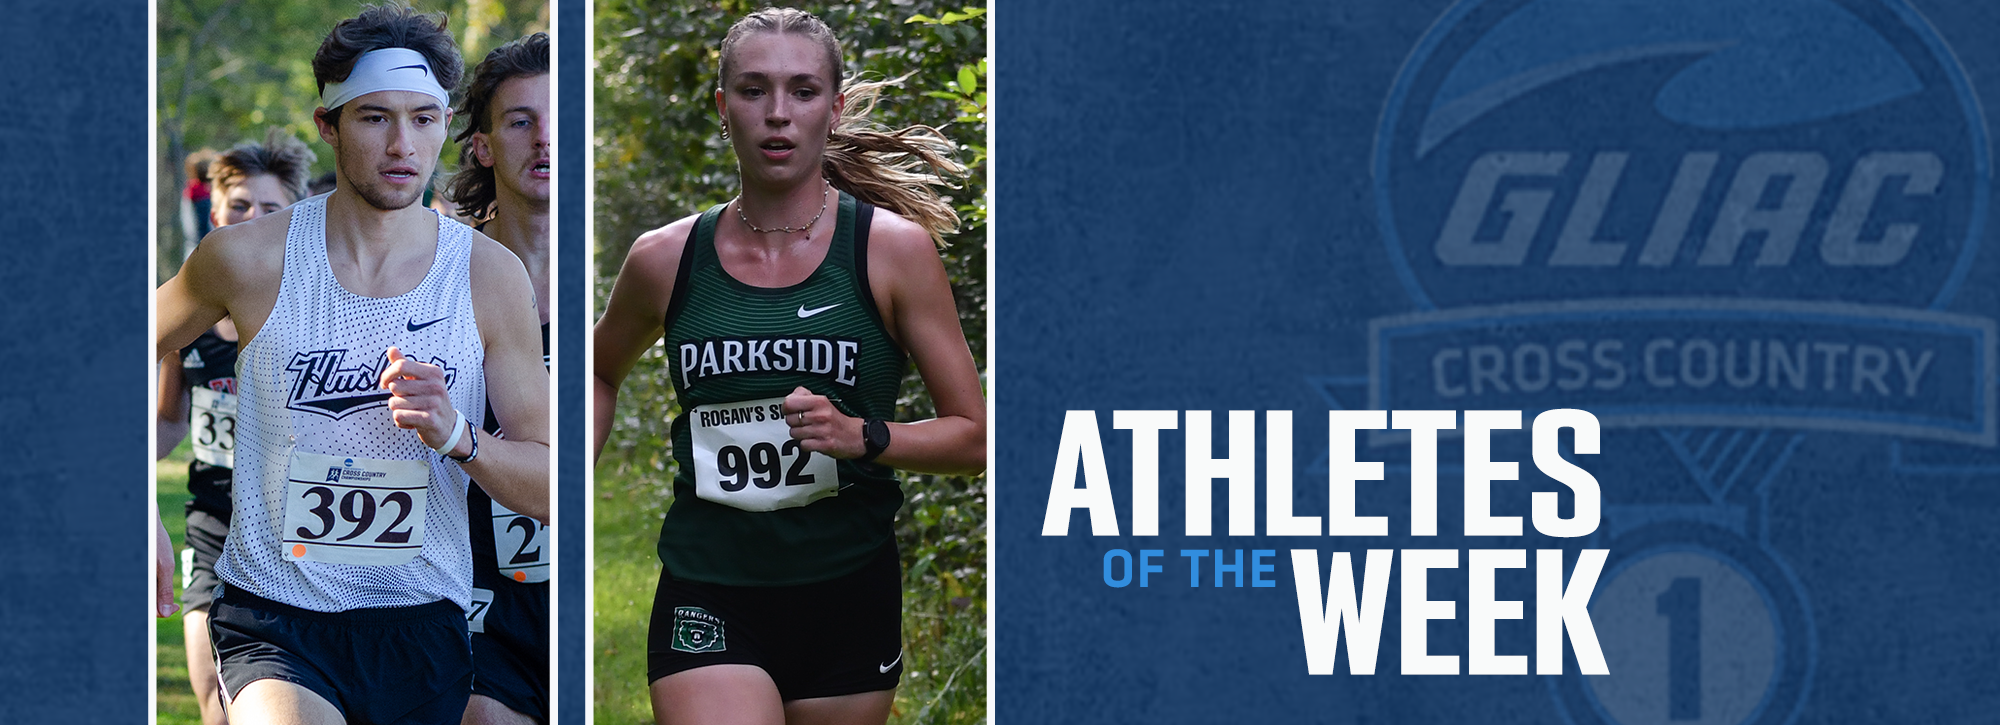 Tech's Lange and Parkside's Baeuerle earn GLIAC weekly cross country honors